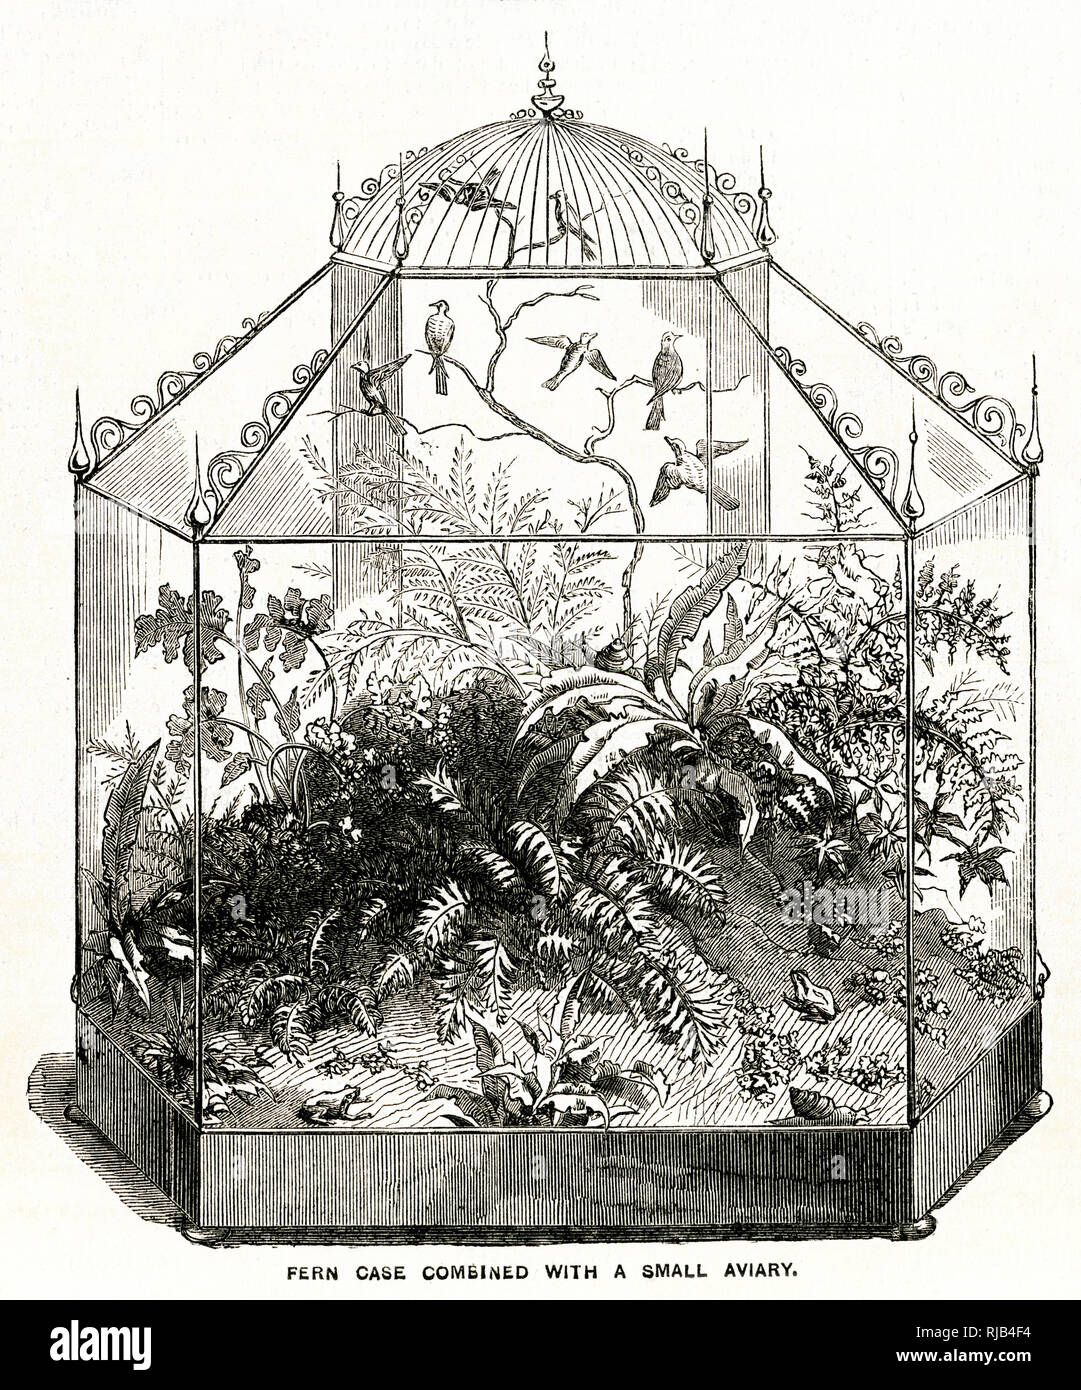 Fern case in the shape of a small aviary with canaries. Scale of the design is three feet long, the space reserved for plants extending 10 inches on either side of the cage or aviary which is 16 inches wide. The height to the commencement of the sloping roof is 18inches; and the height to the point where the sloping glass roof meets the wre-work of the cage 9 inches more making the total height 27 inches the wire-work rising about 6 inches above. Stock Photo